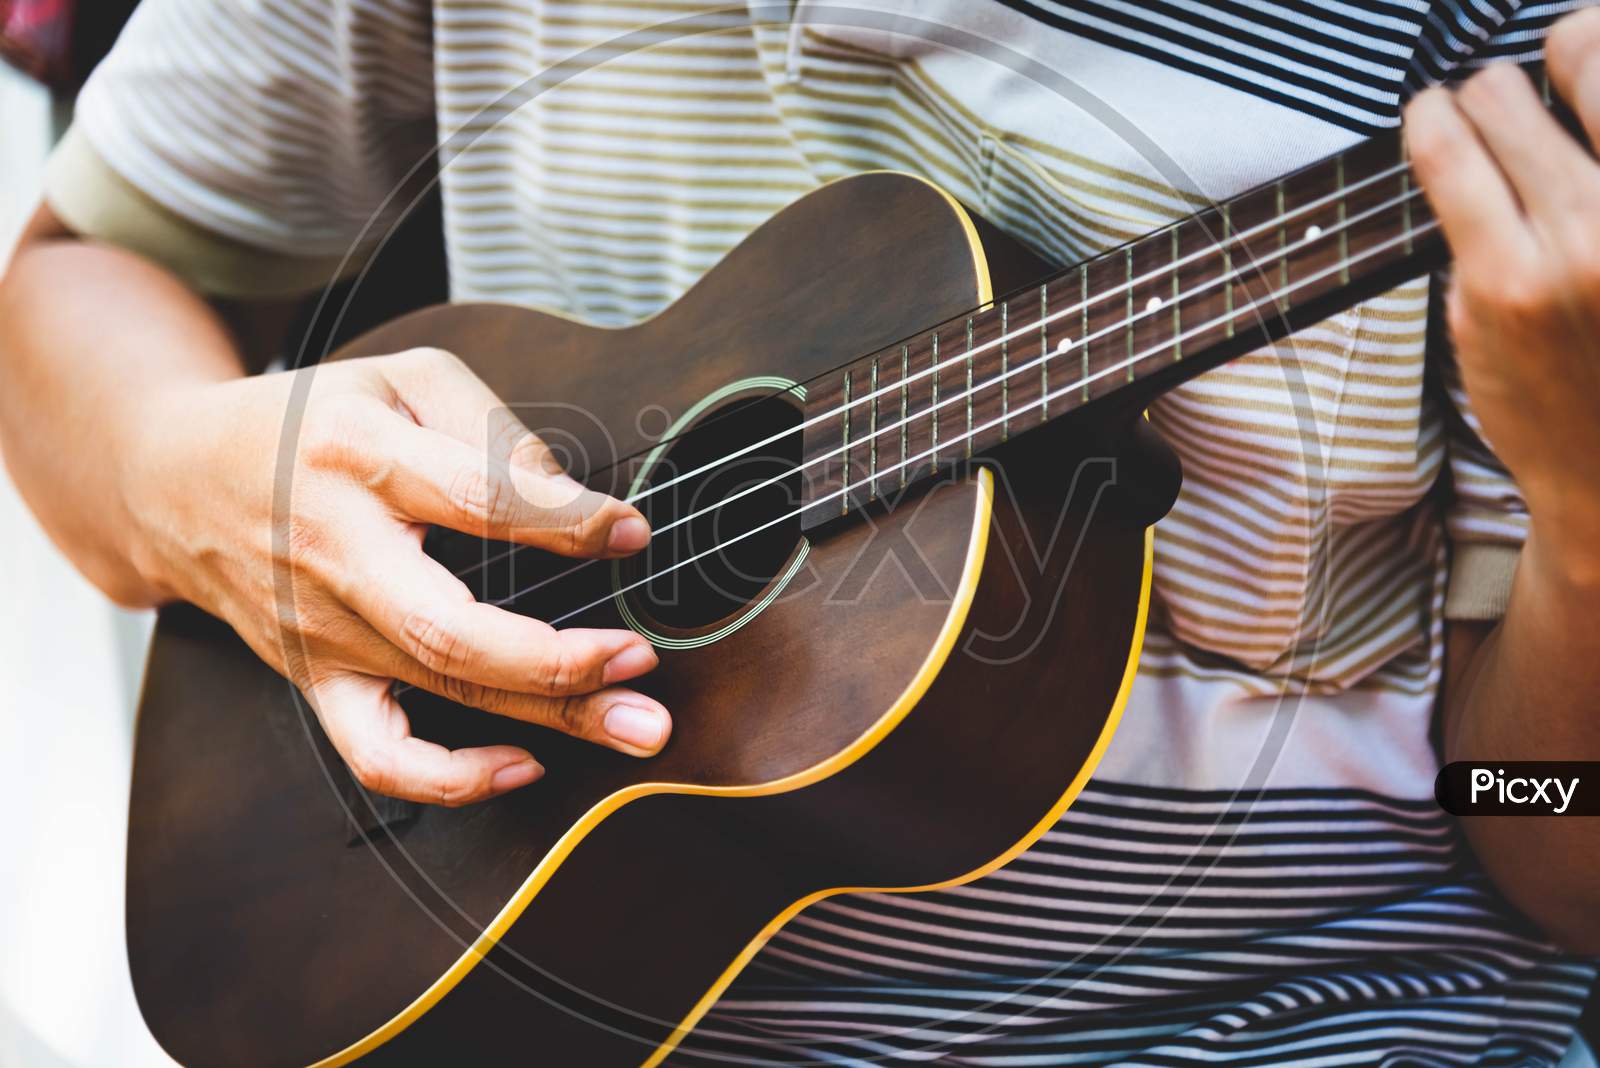 Closeup Of Guitarist Hand Playing Guitar. Musical Instrument Concept. Outdoors And Leisure Theme. Selective Focus On Left Hand. Vintage Country Folk Guitar With Music Singer. Close Up Entertainer Hand